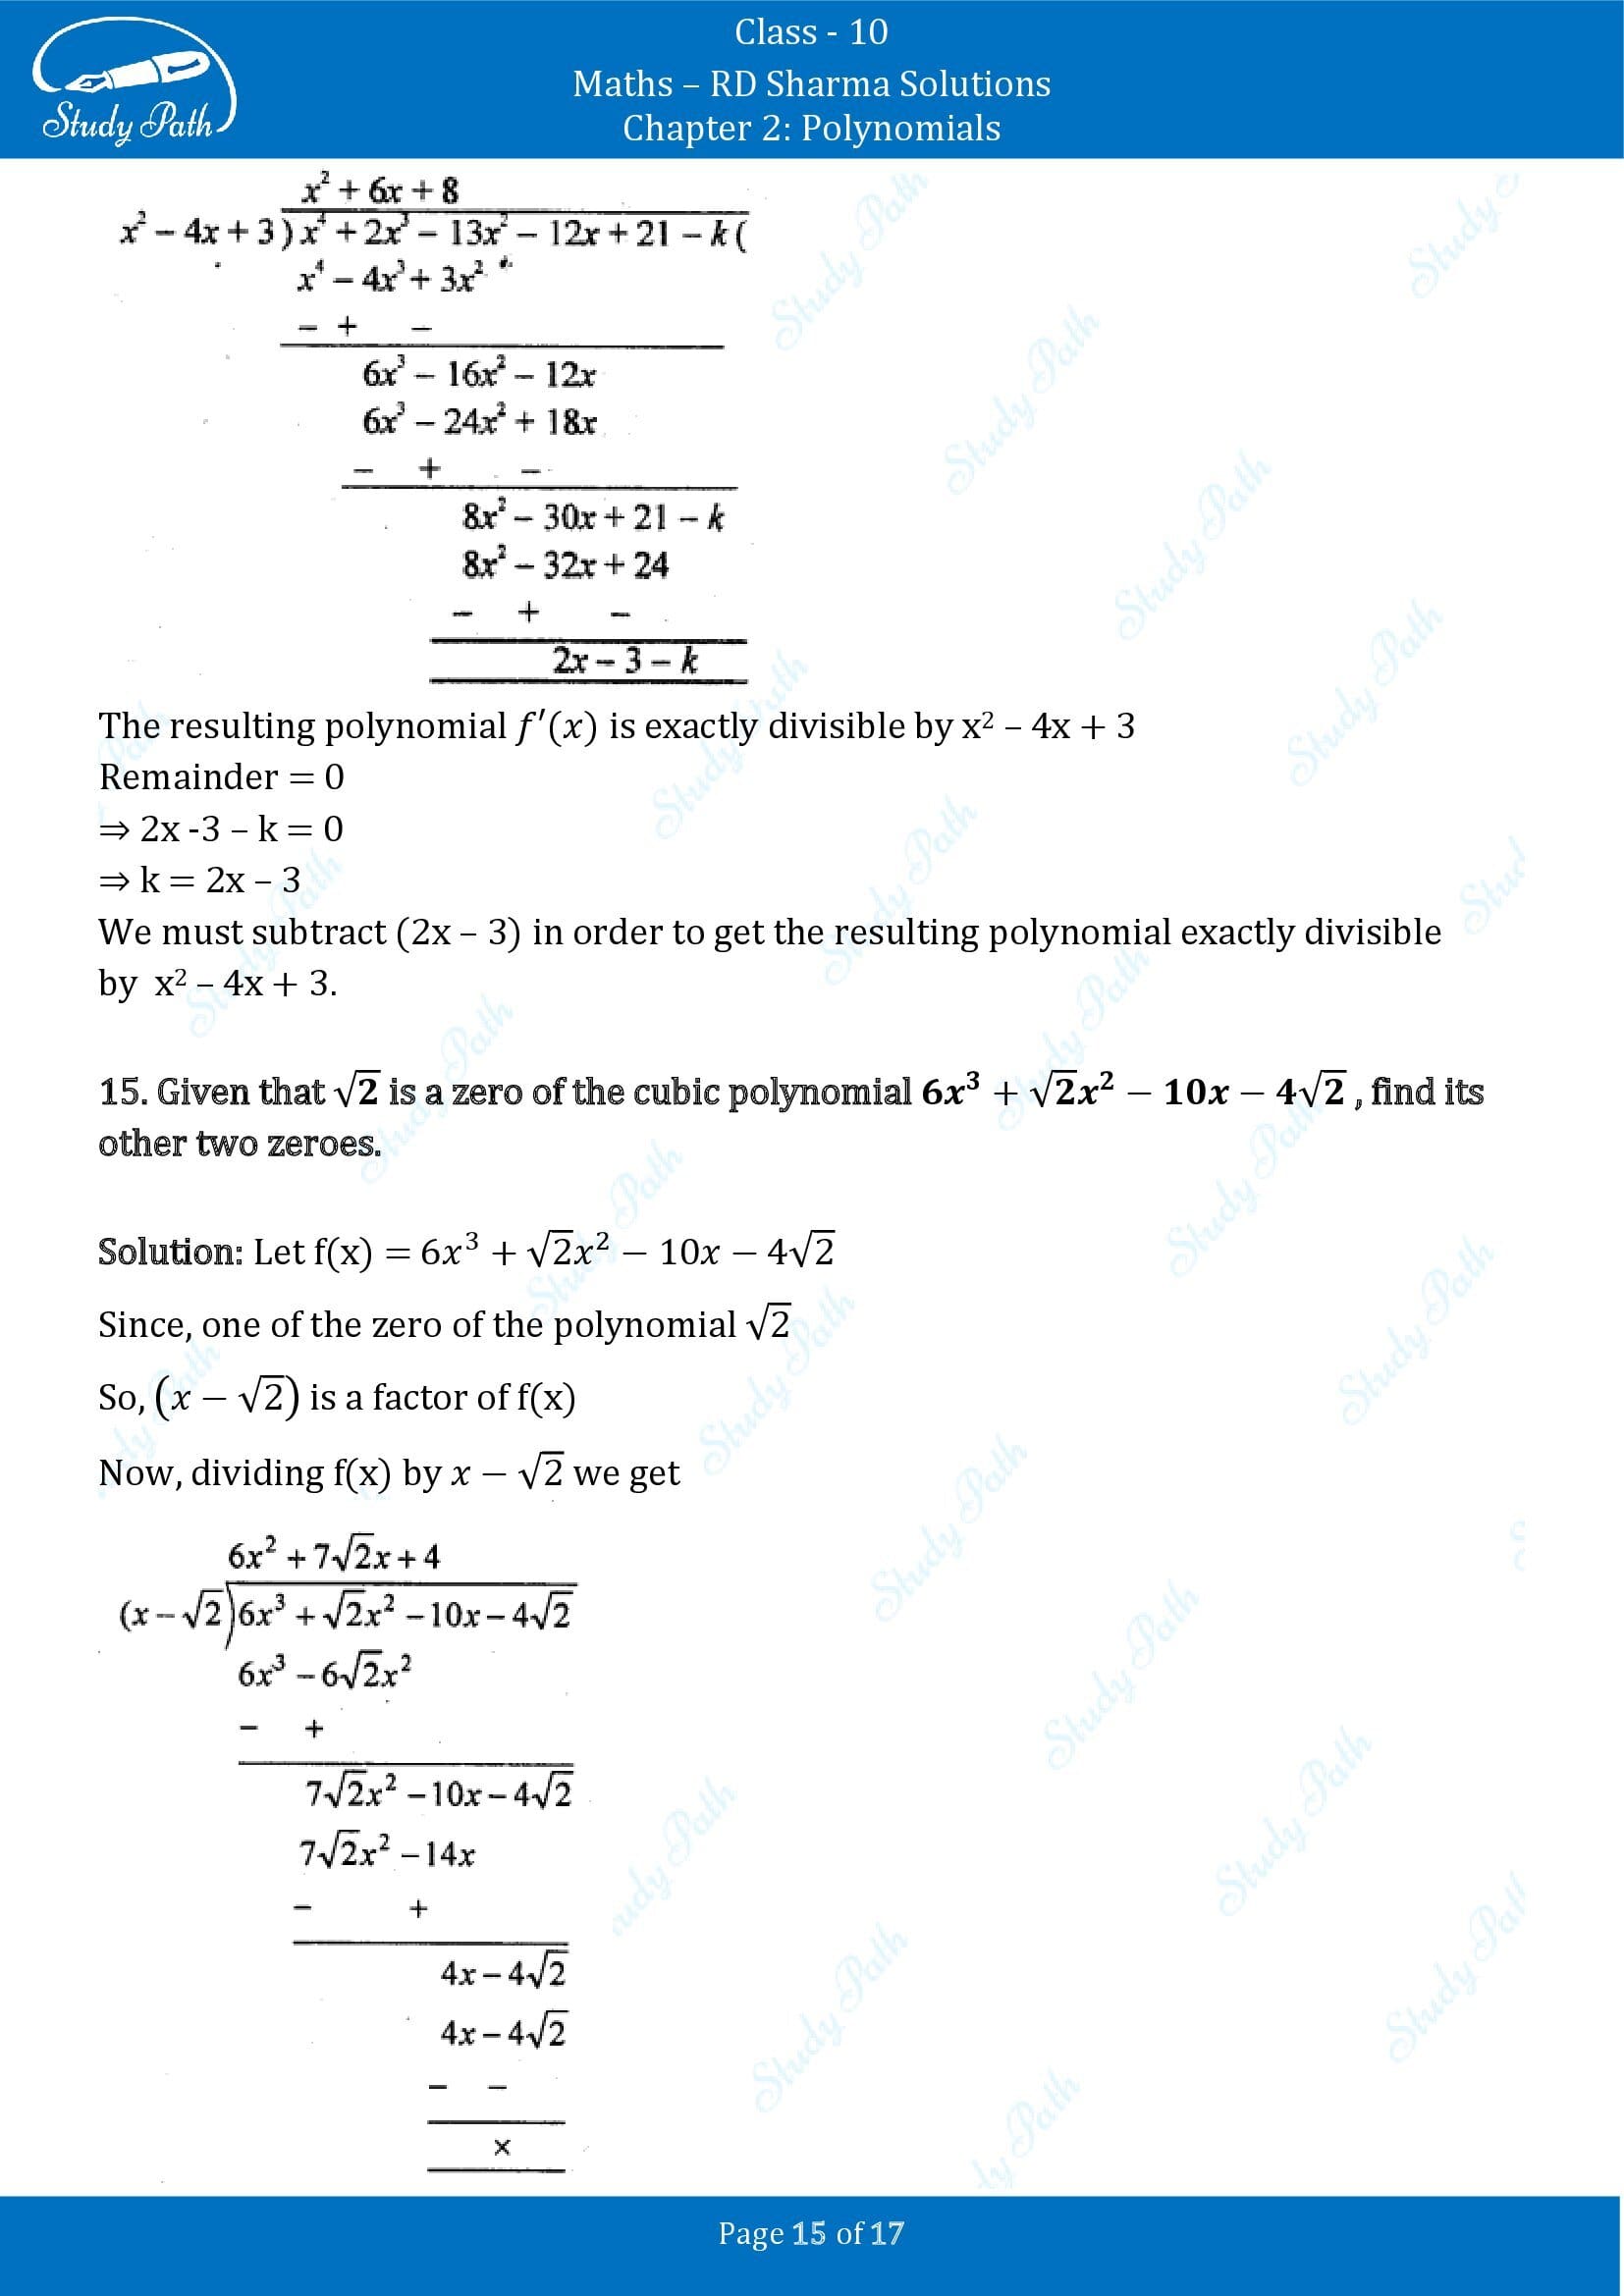 RD Sharma Solutions Class 10 Chapter 2 Polynomials Exercise 2.3 00015